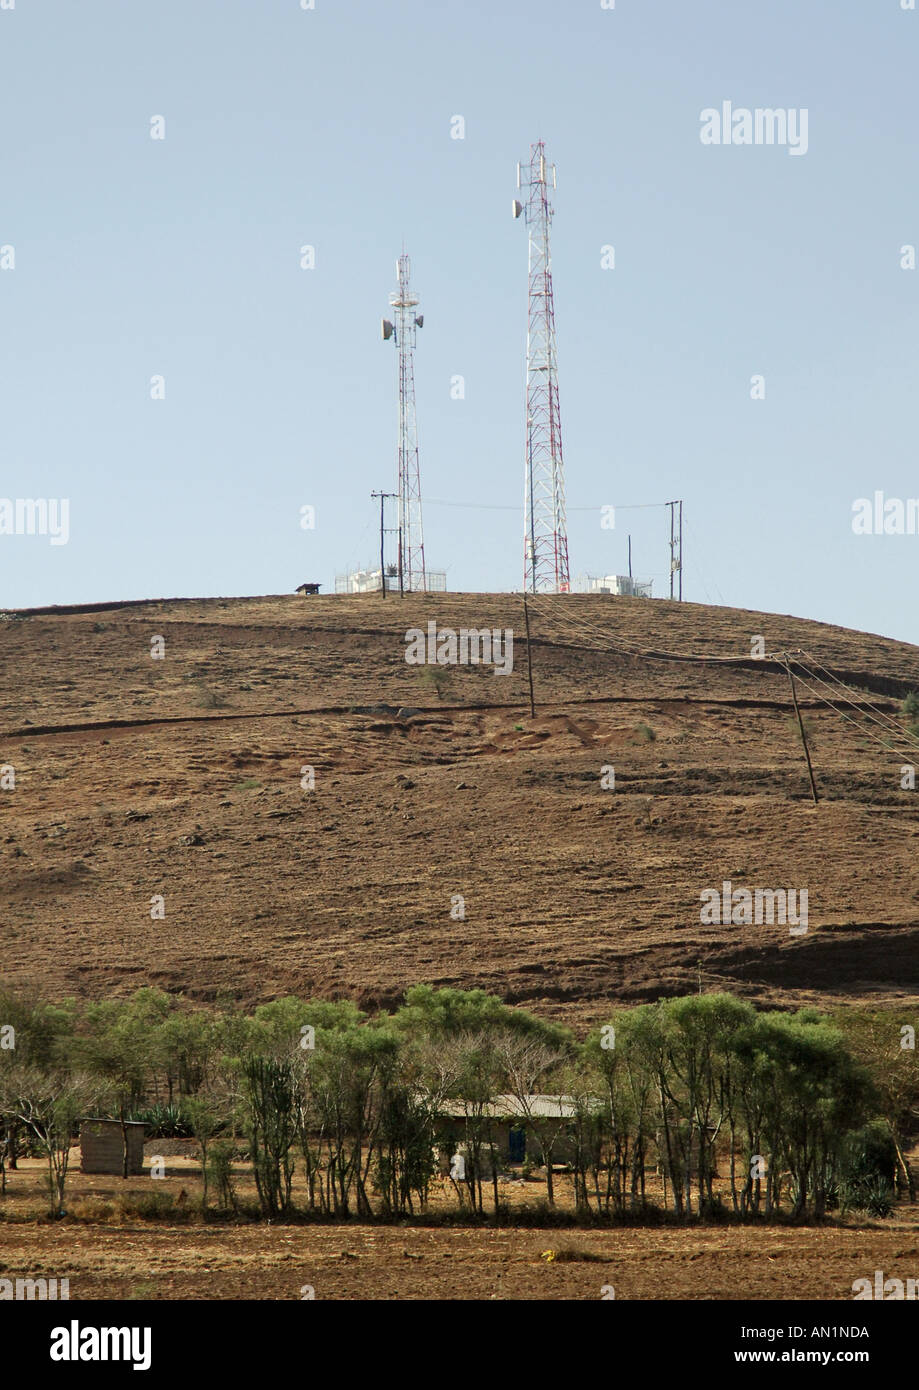 Telecommunication towers in a rural area in northern Tanzania Stock Photo